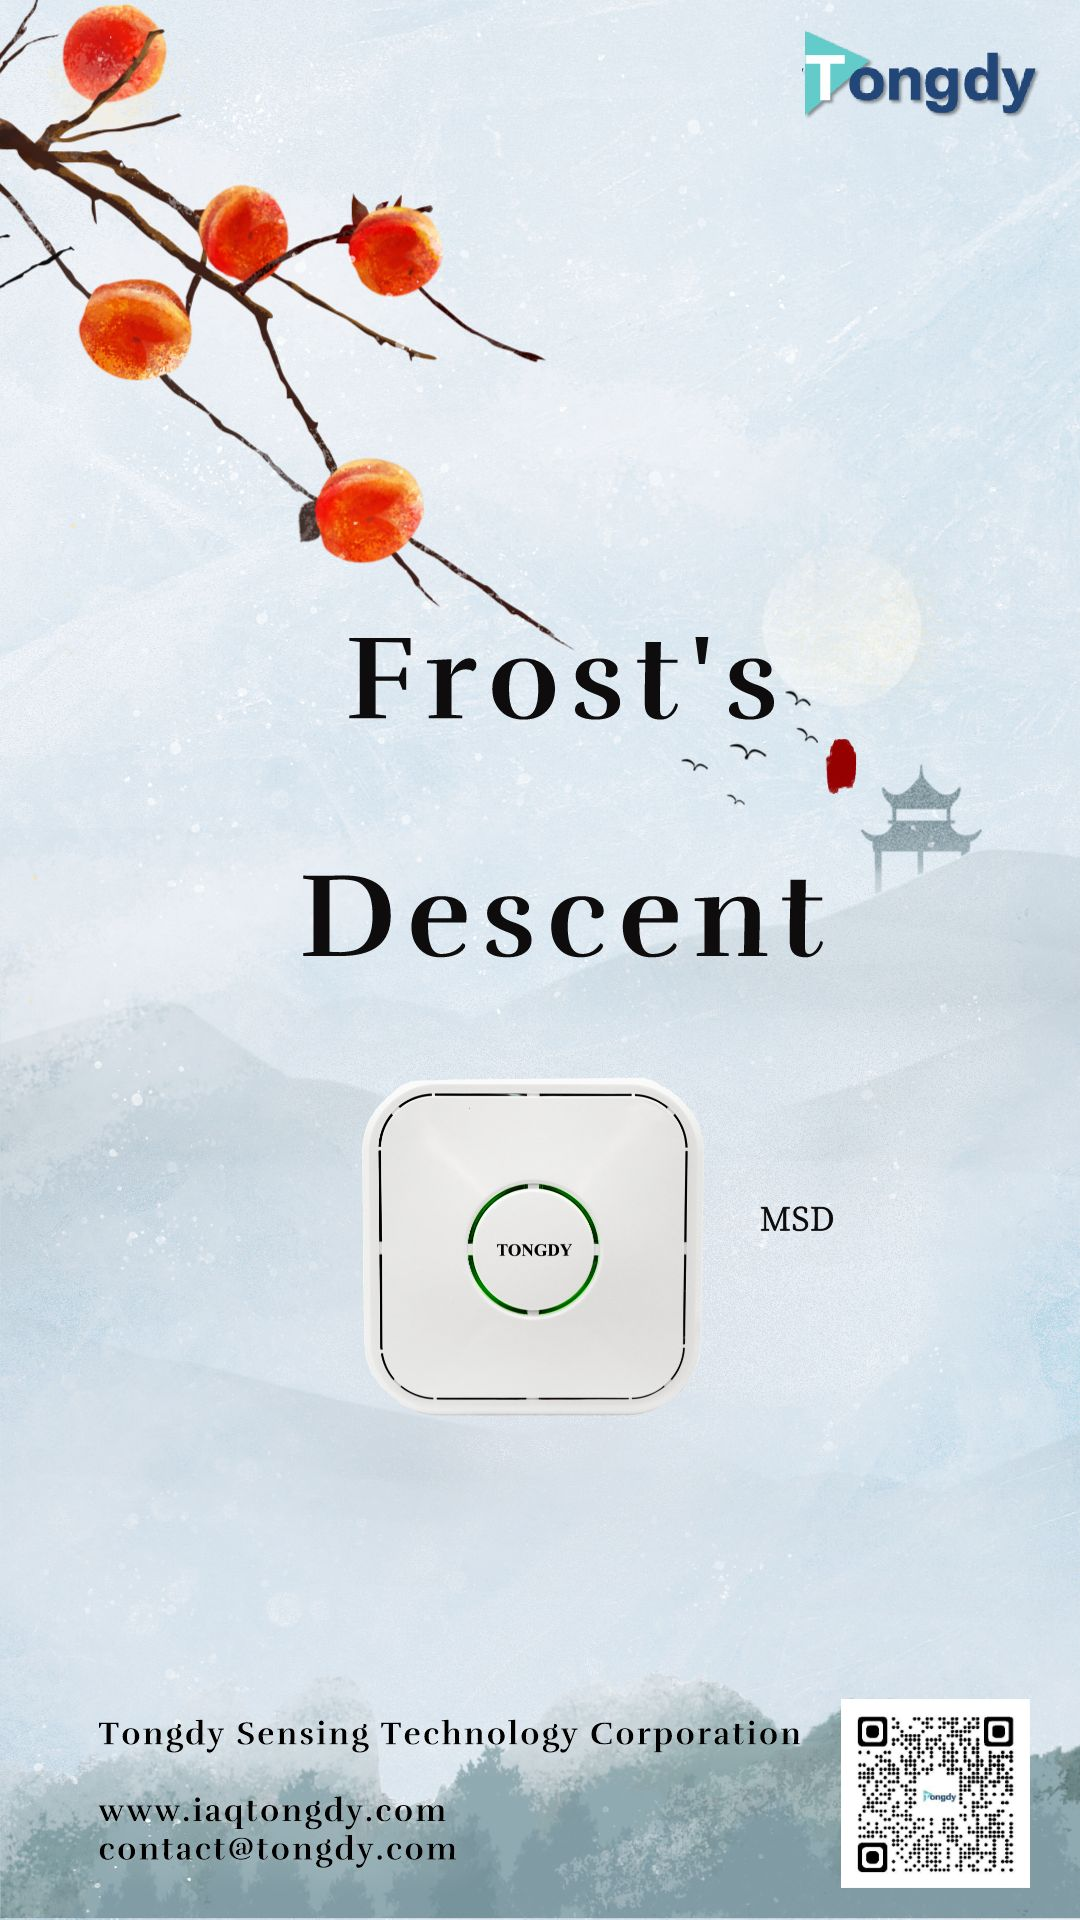 Frost's Descent